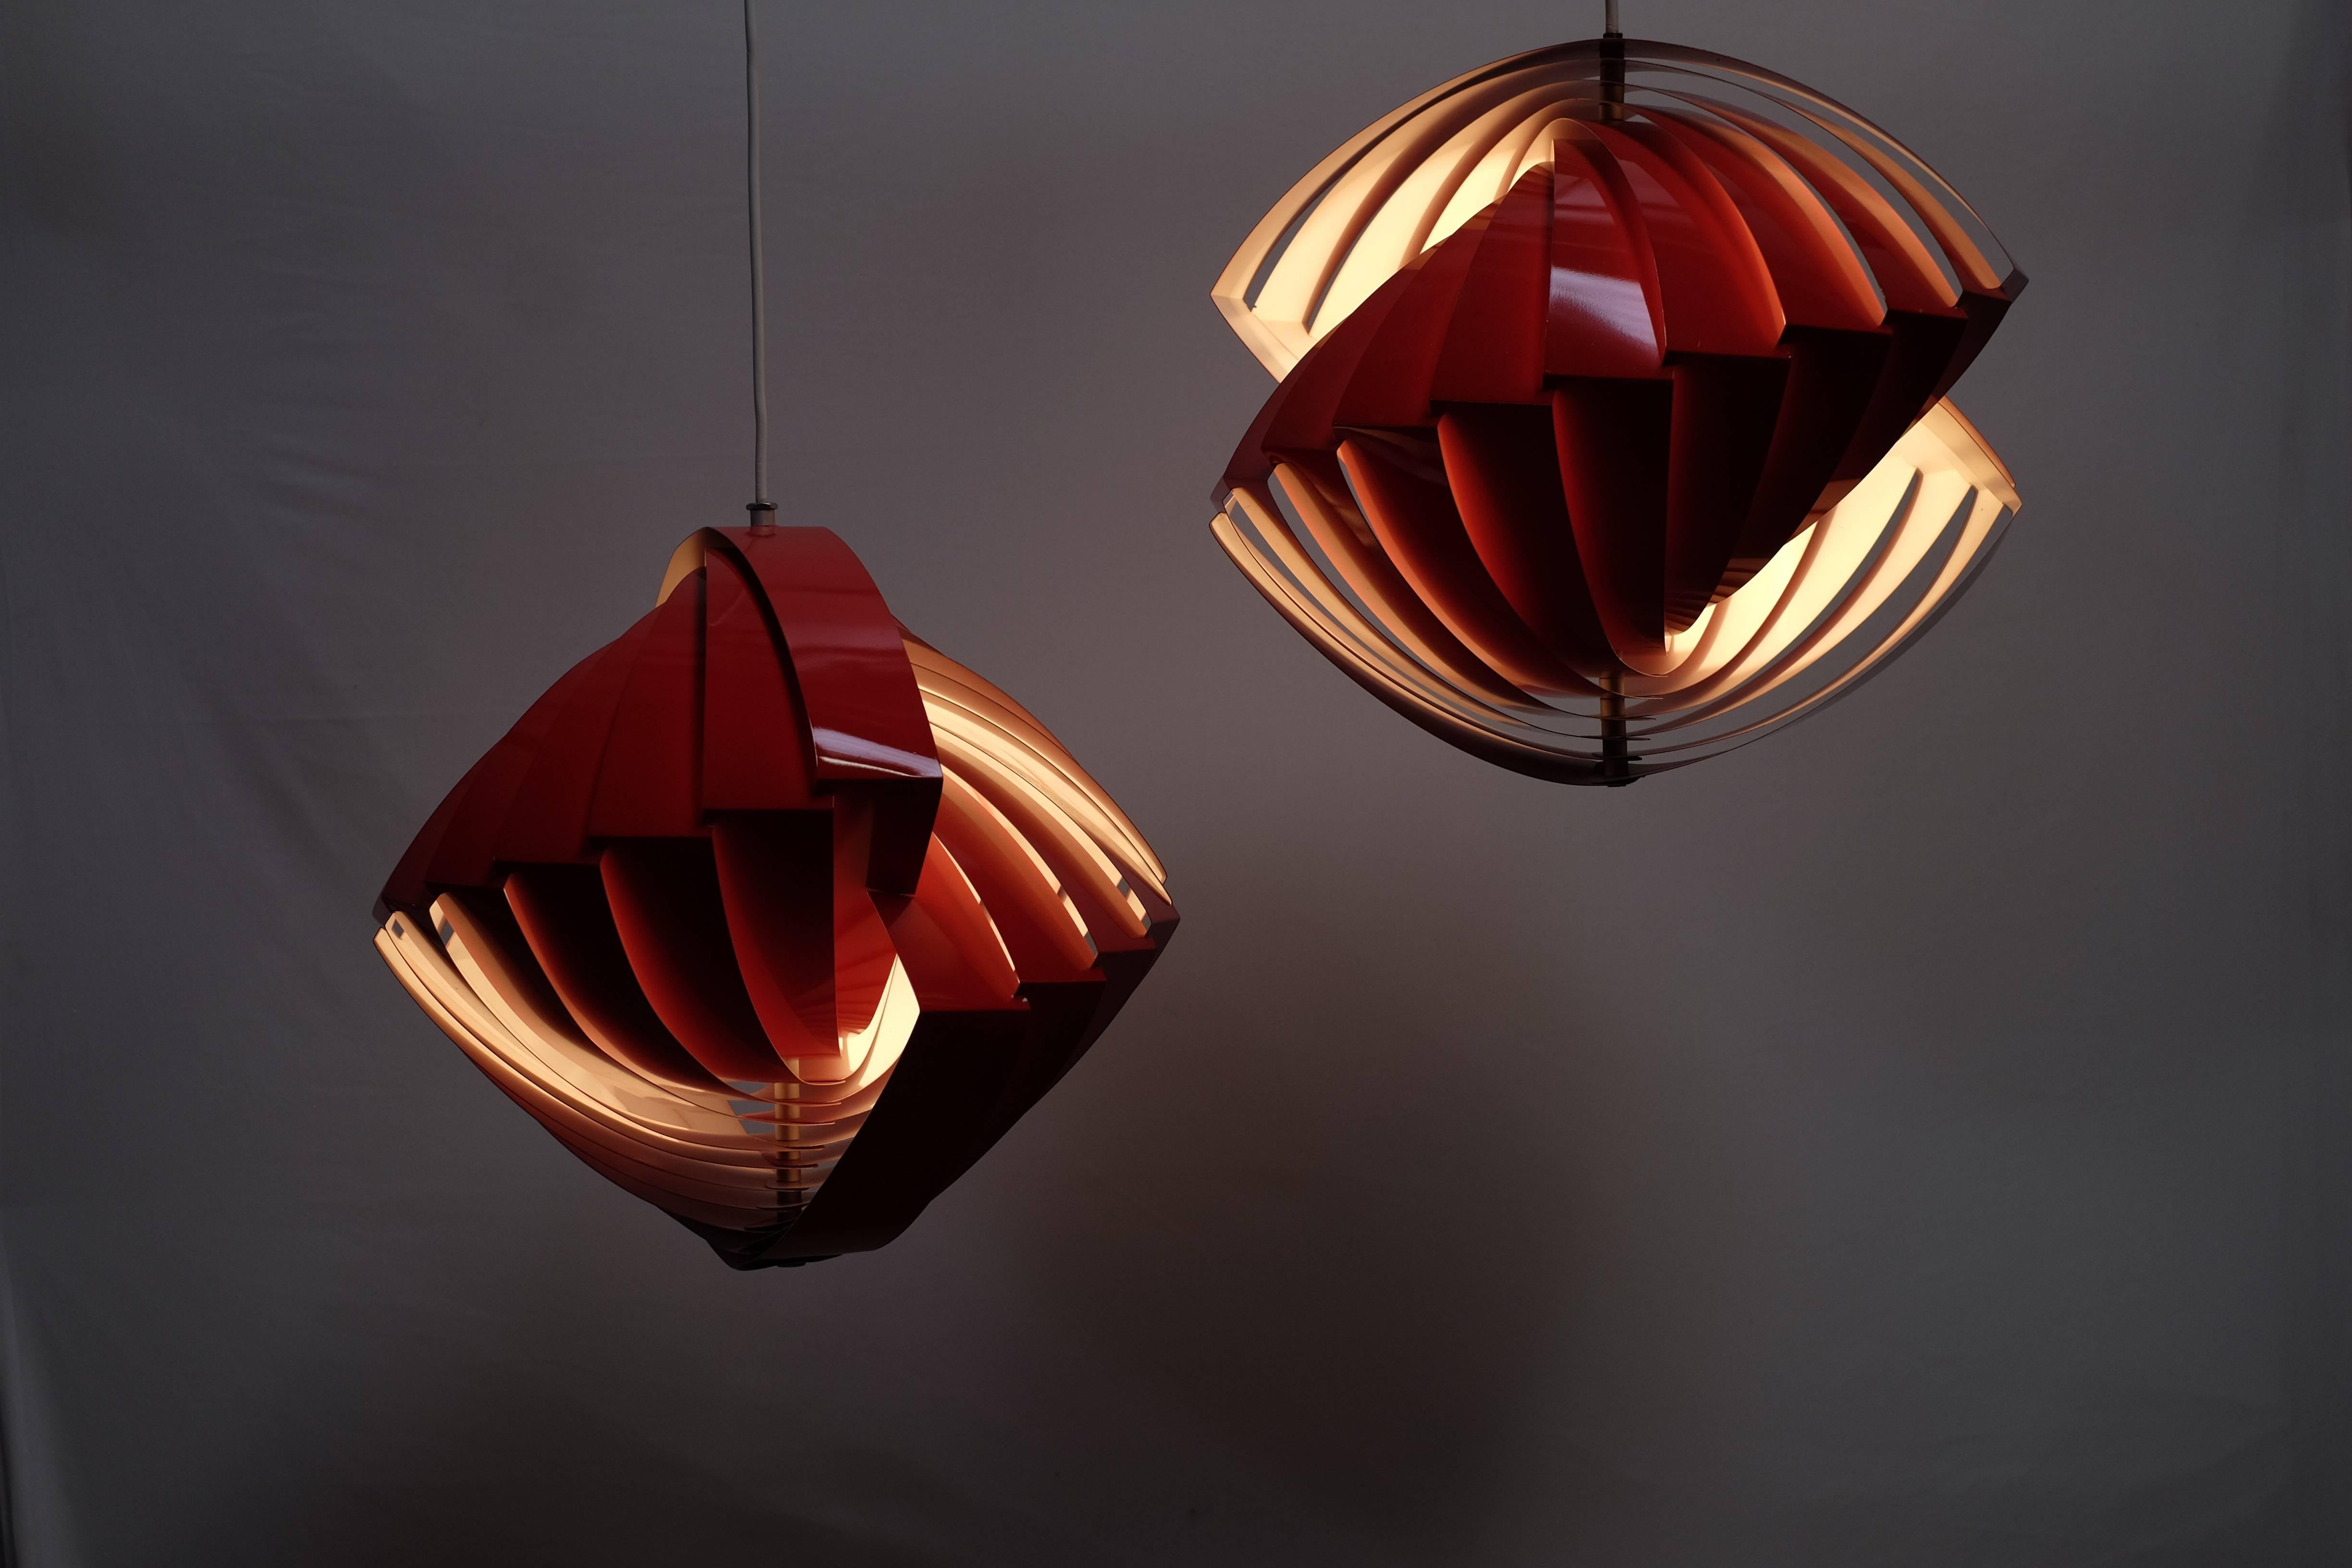 Amazing and iconic Danish lamp by Louis Weisdorf designed for Tivoli in Copenhagen.

The shape is like a round going spiral and the lamp is very interesting to spin - gives a cozy light. 
Great as a dining lamp, but also looks amazing in a